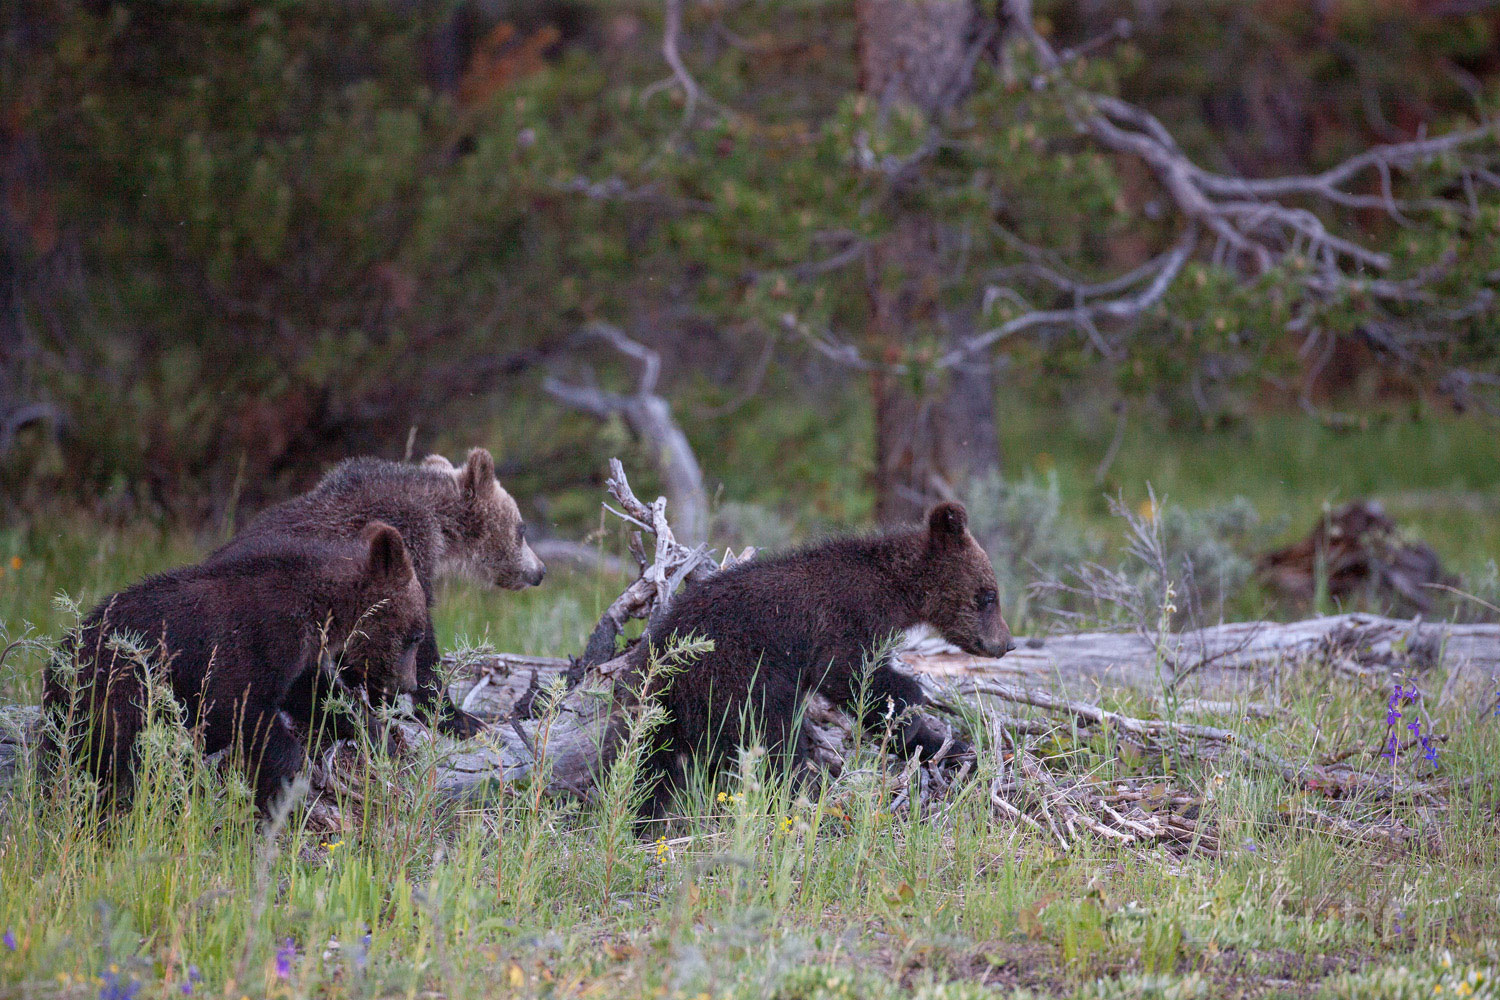 Two of grizzly 399's three cubs play on fallen timbers.